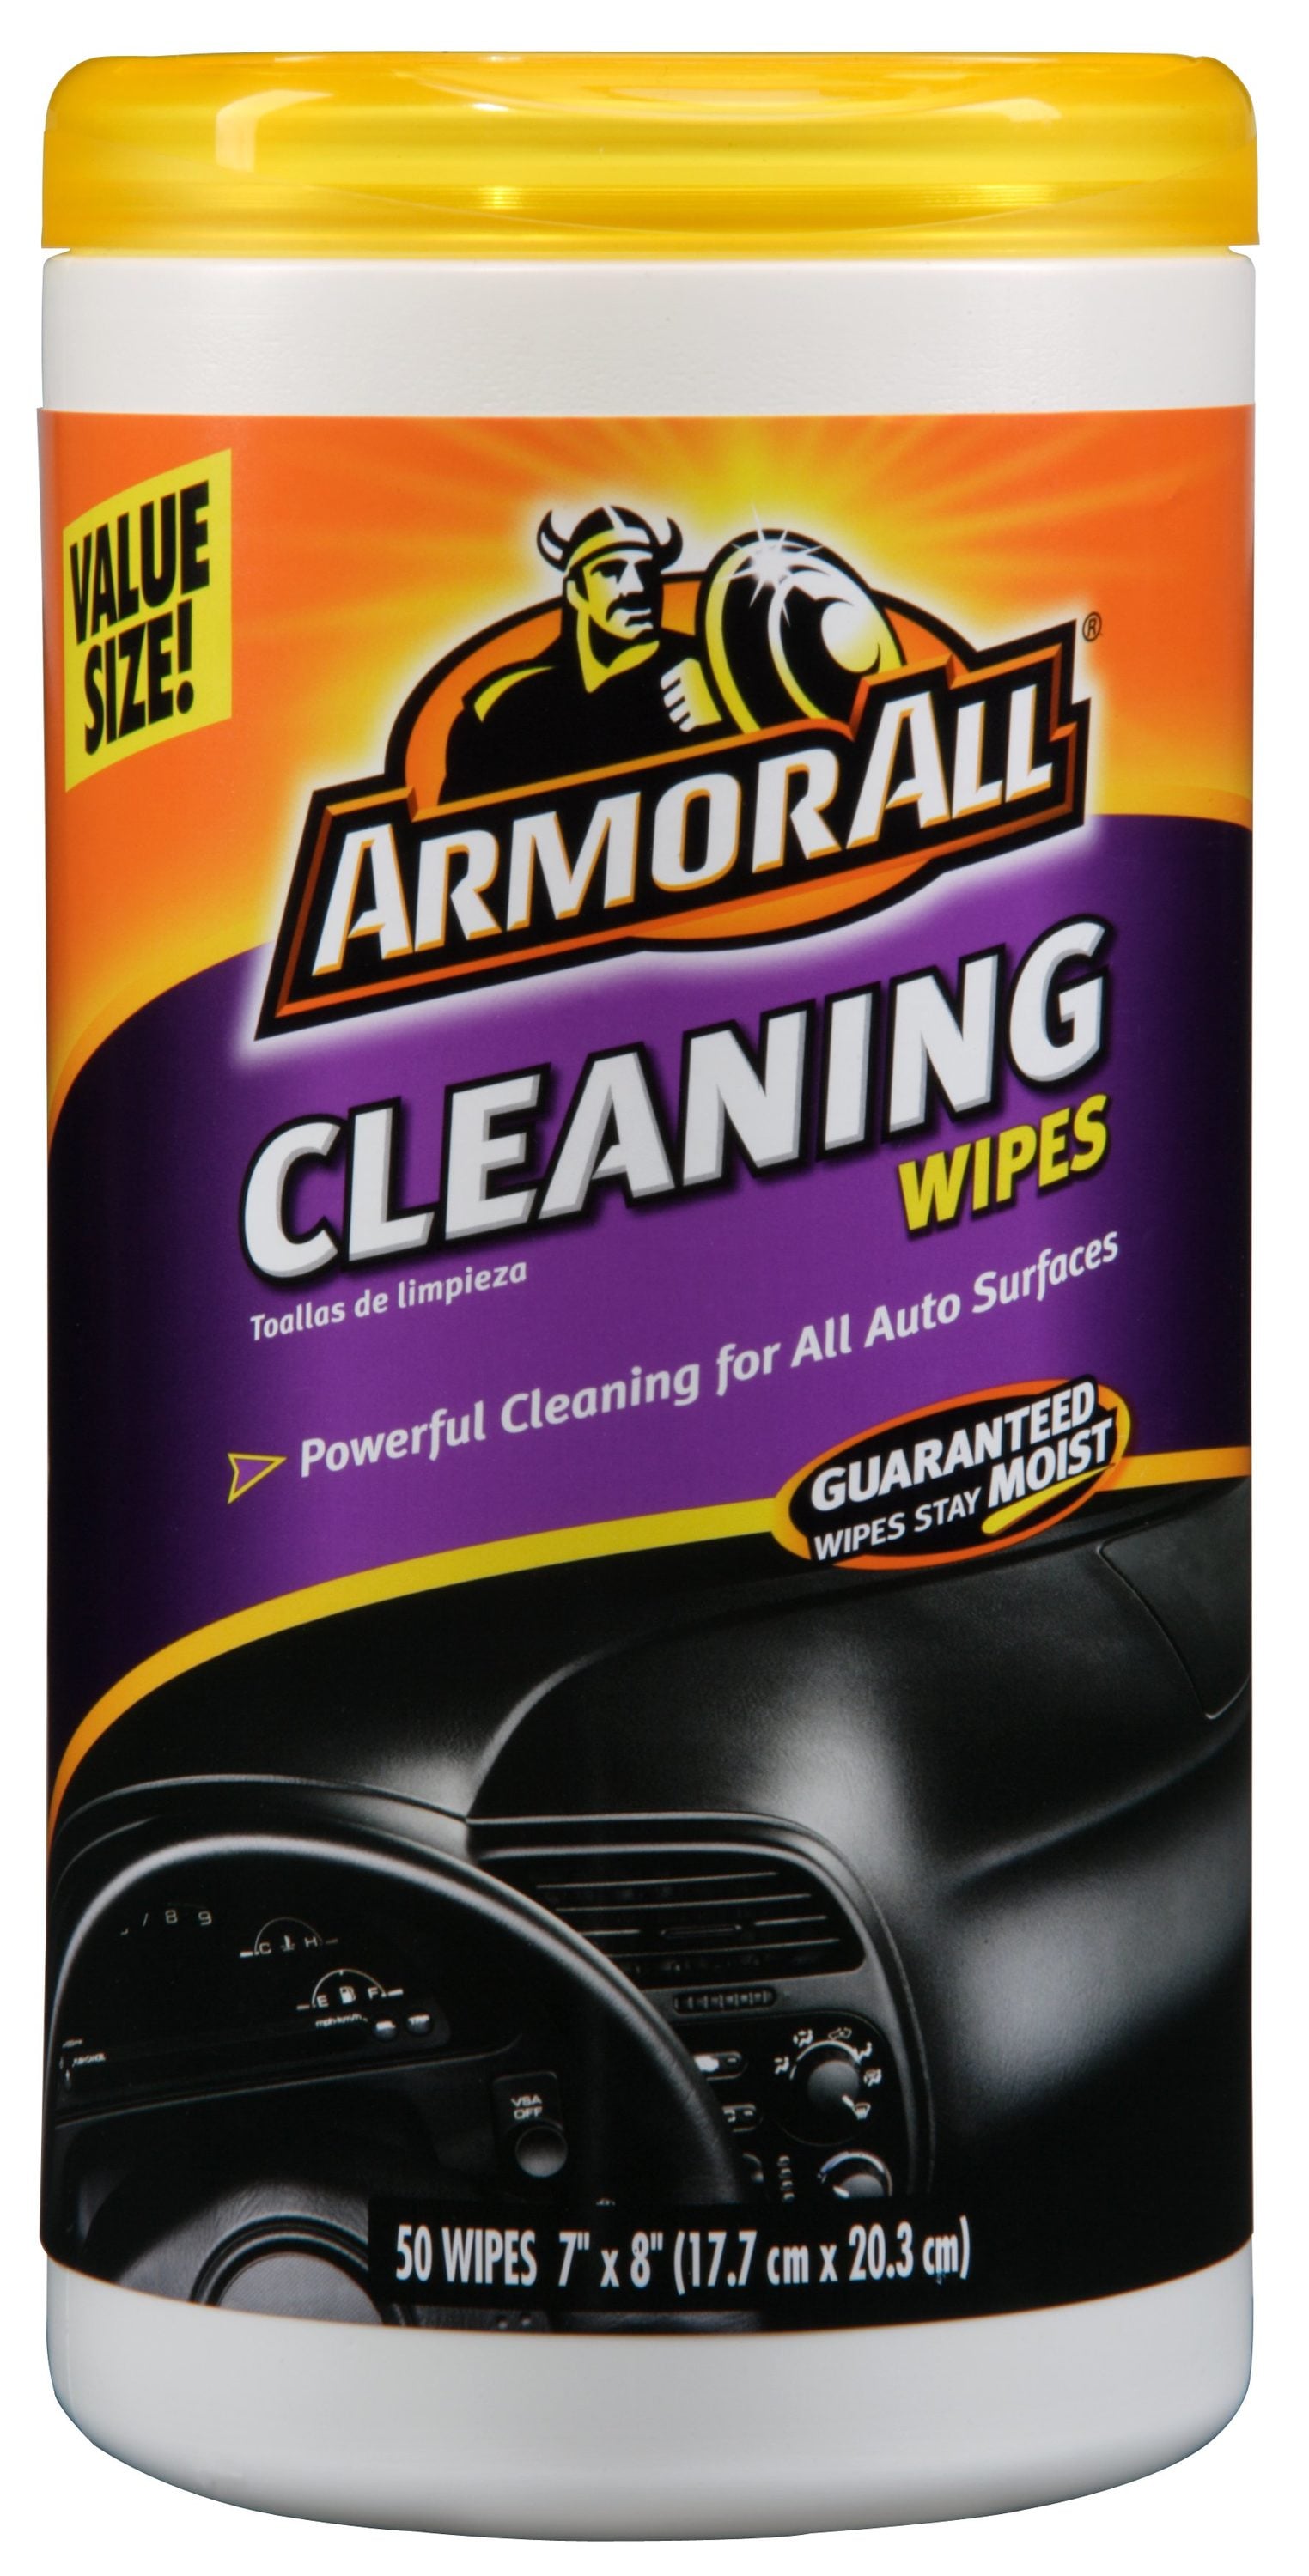  Armor All Disinfectant Wipes by Armor All, Disinfecting Car Cleaning  Wipes, 50 Count Each, Pack of 2 : Movies & TV